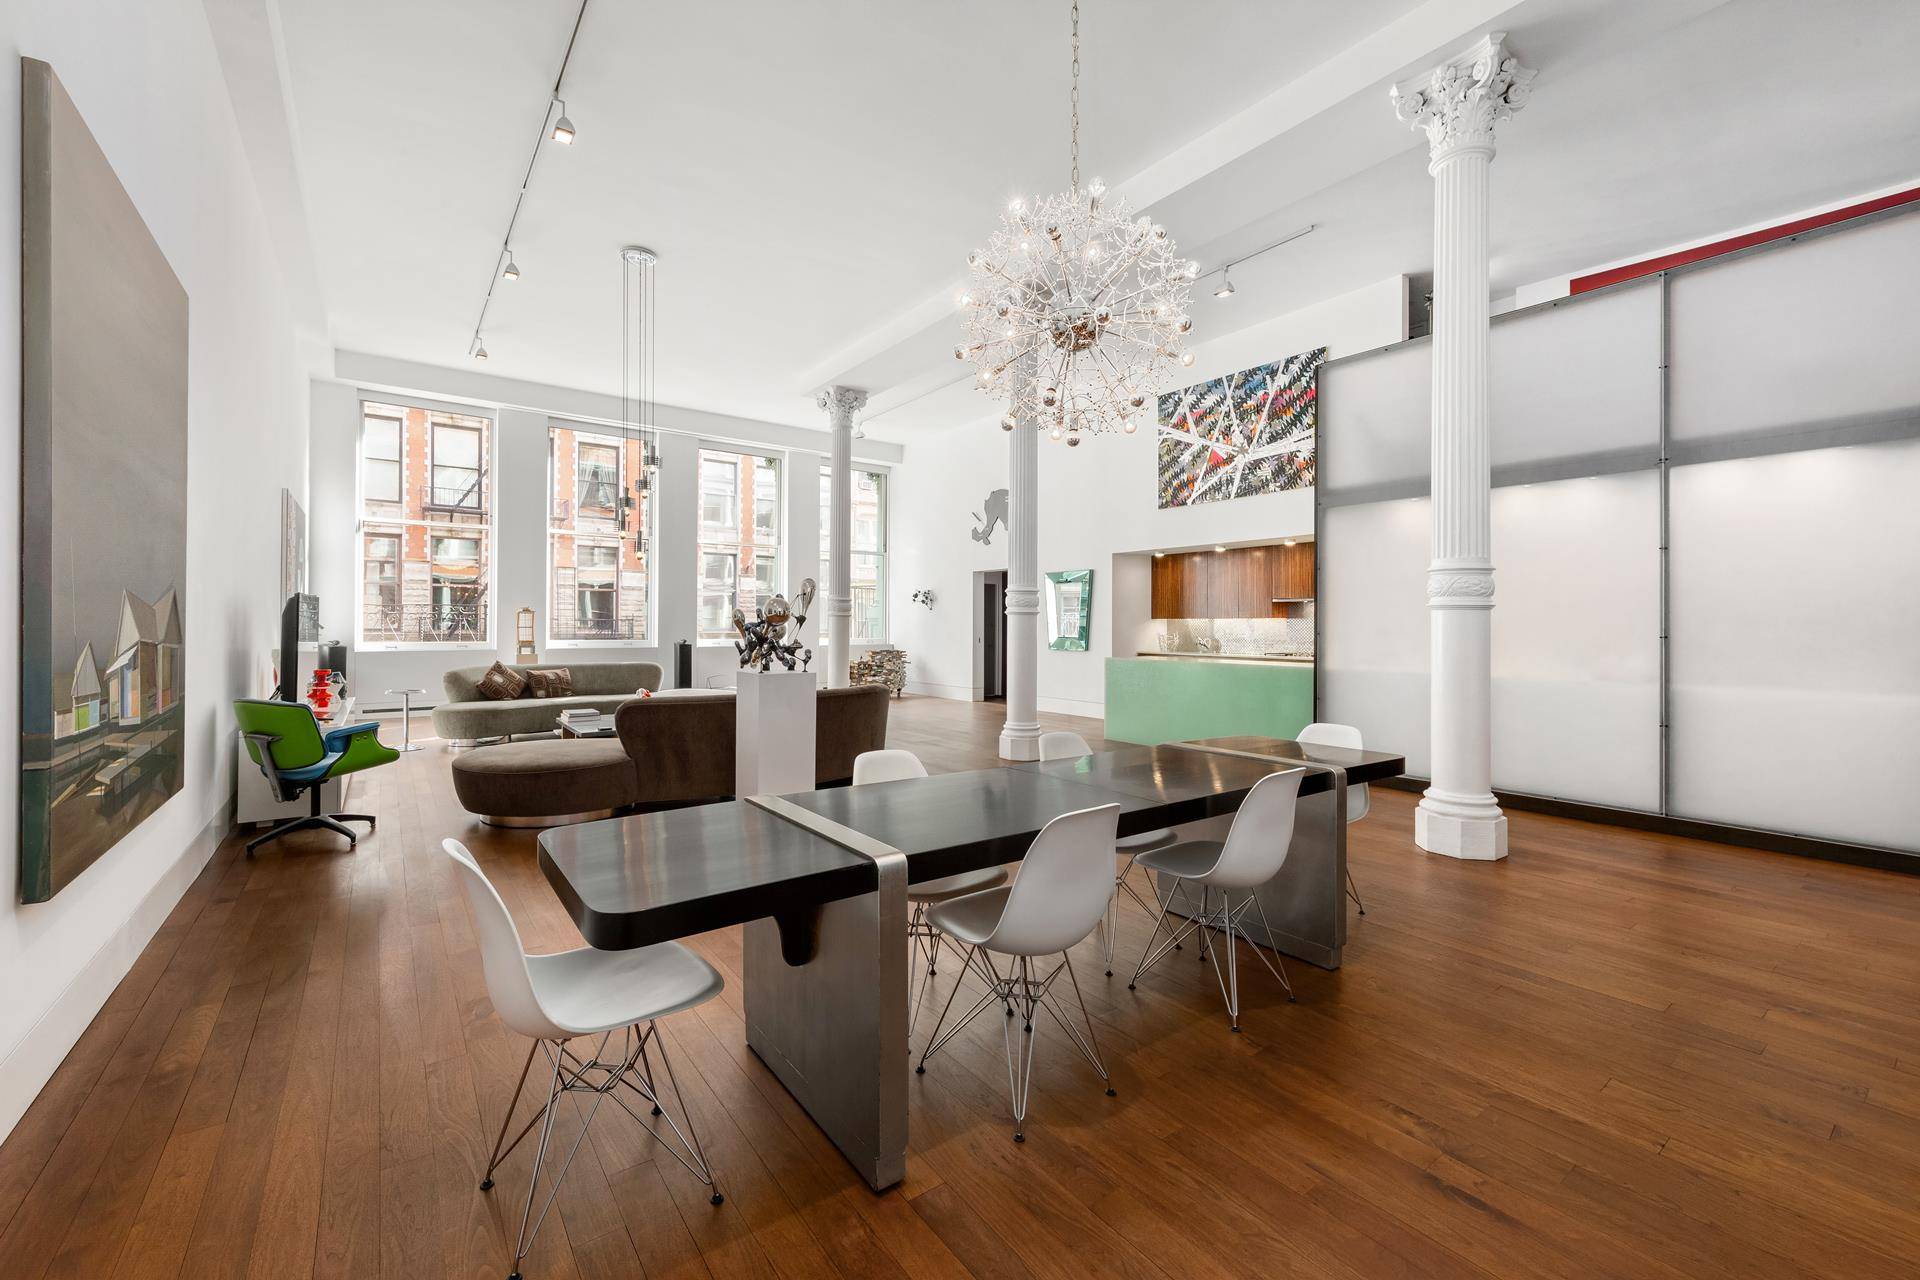 Incredible design, awe inspiring scale, towering ceilings and brilliant condition come together in the perfect SoHo location.